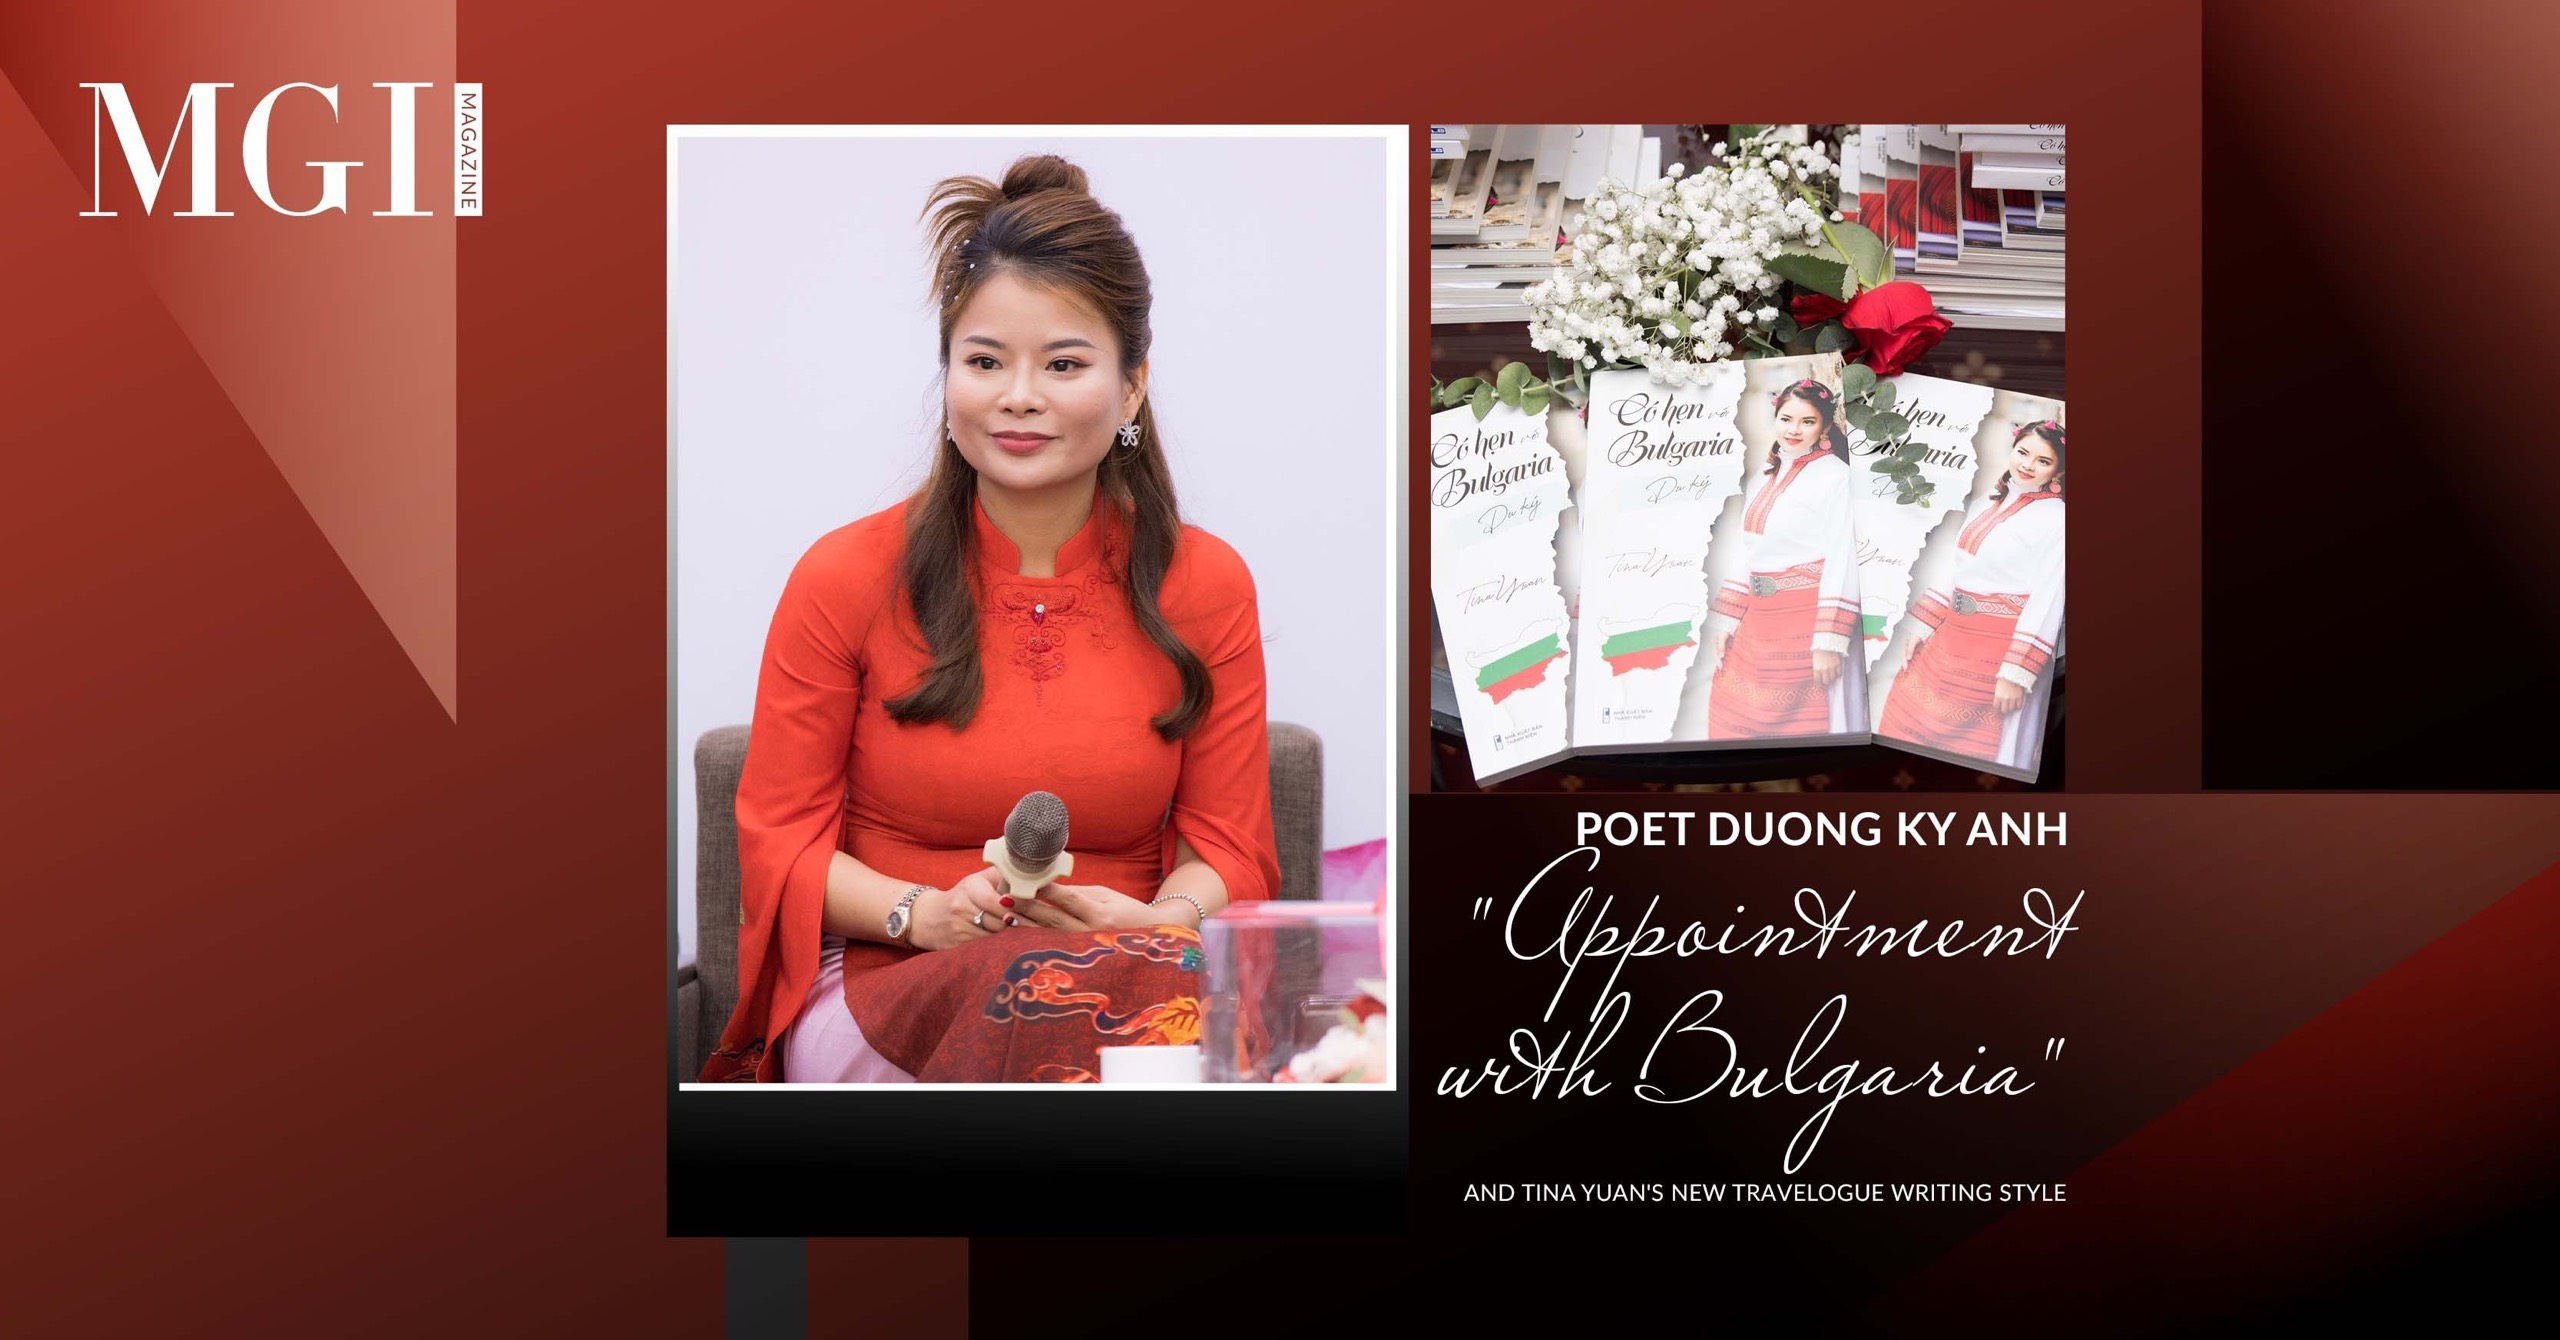 Poet Duong Ky Anh: "Appointment with Bulgaria" and Tina Yuan's new travelogue writing style.